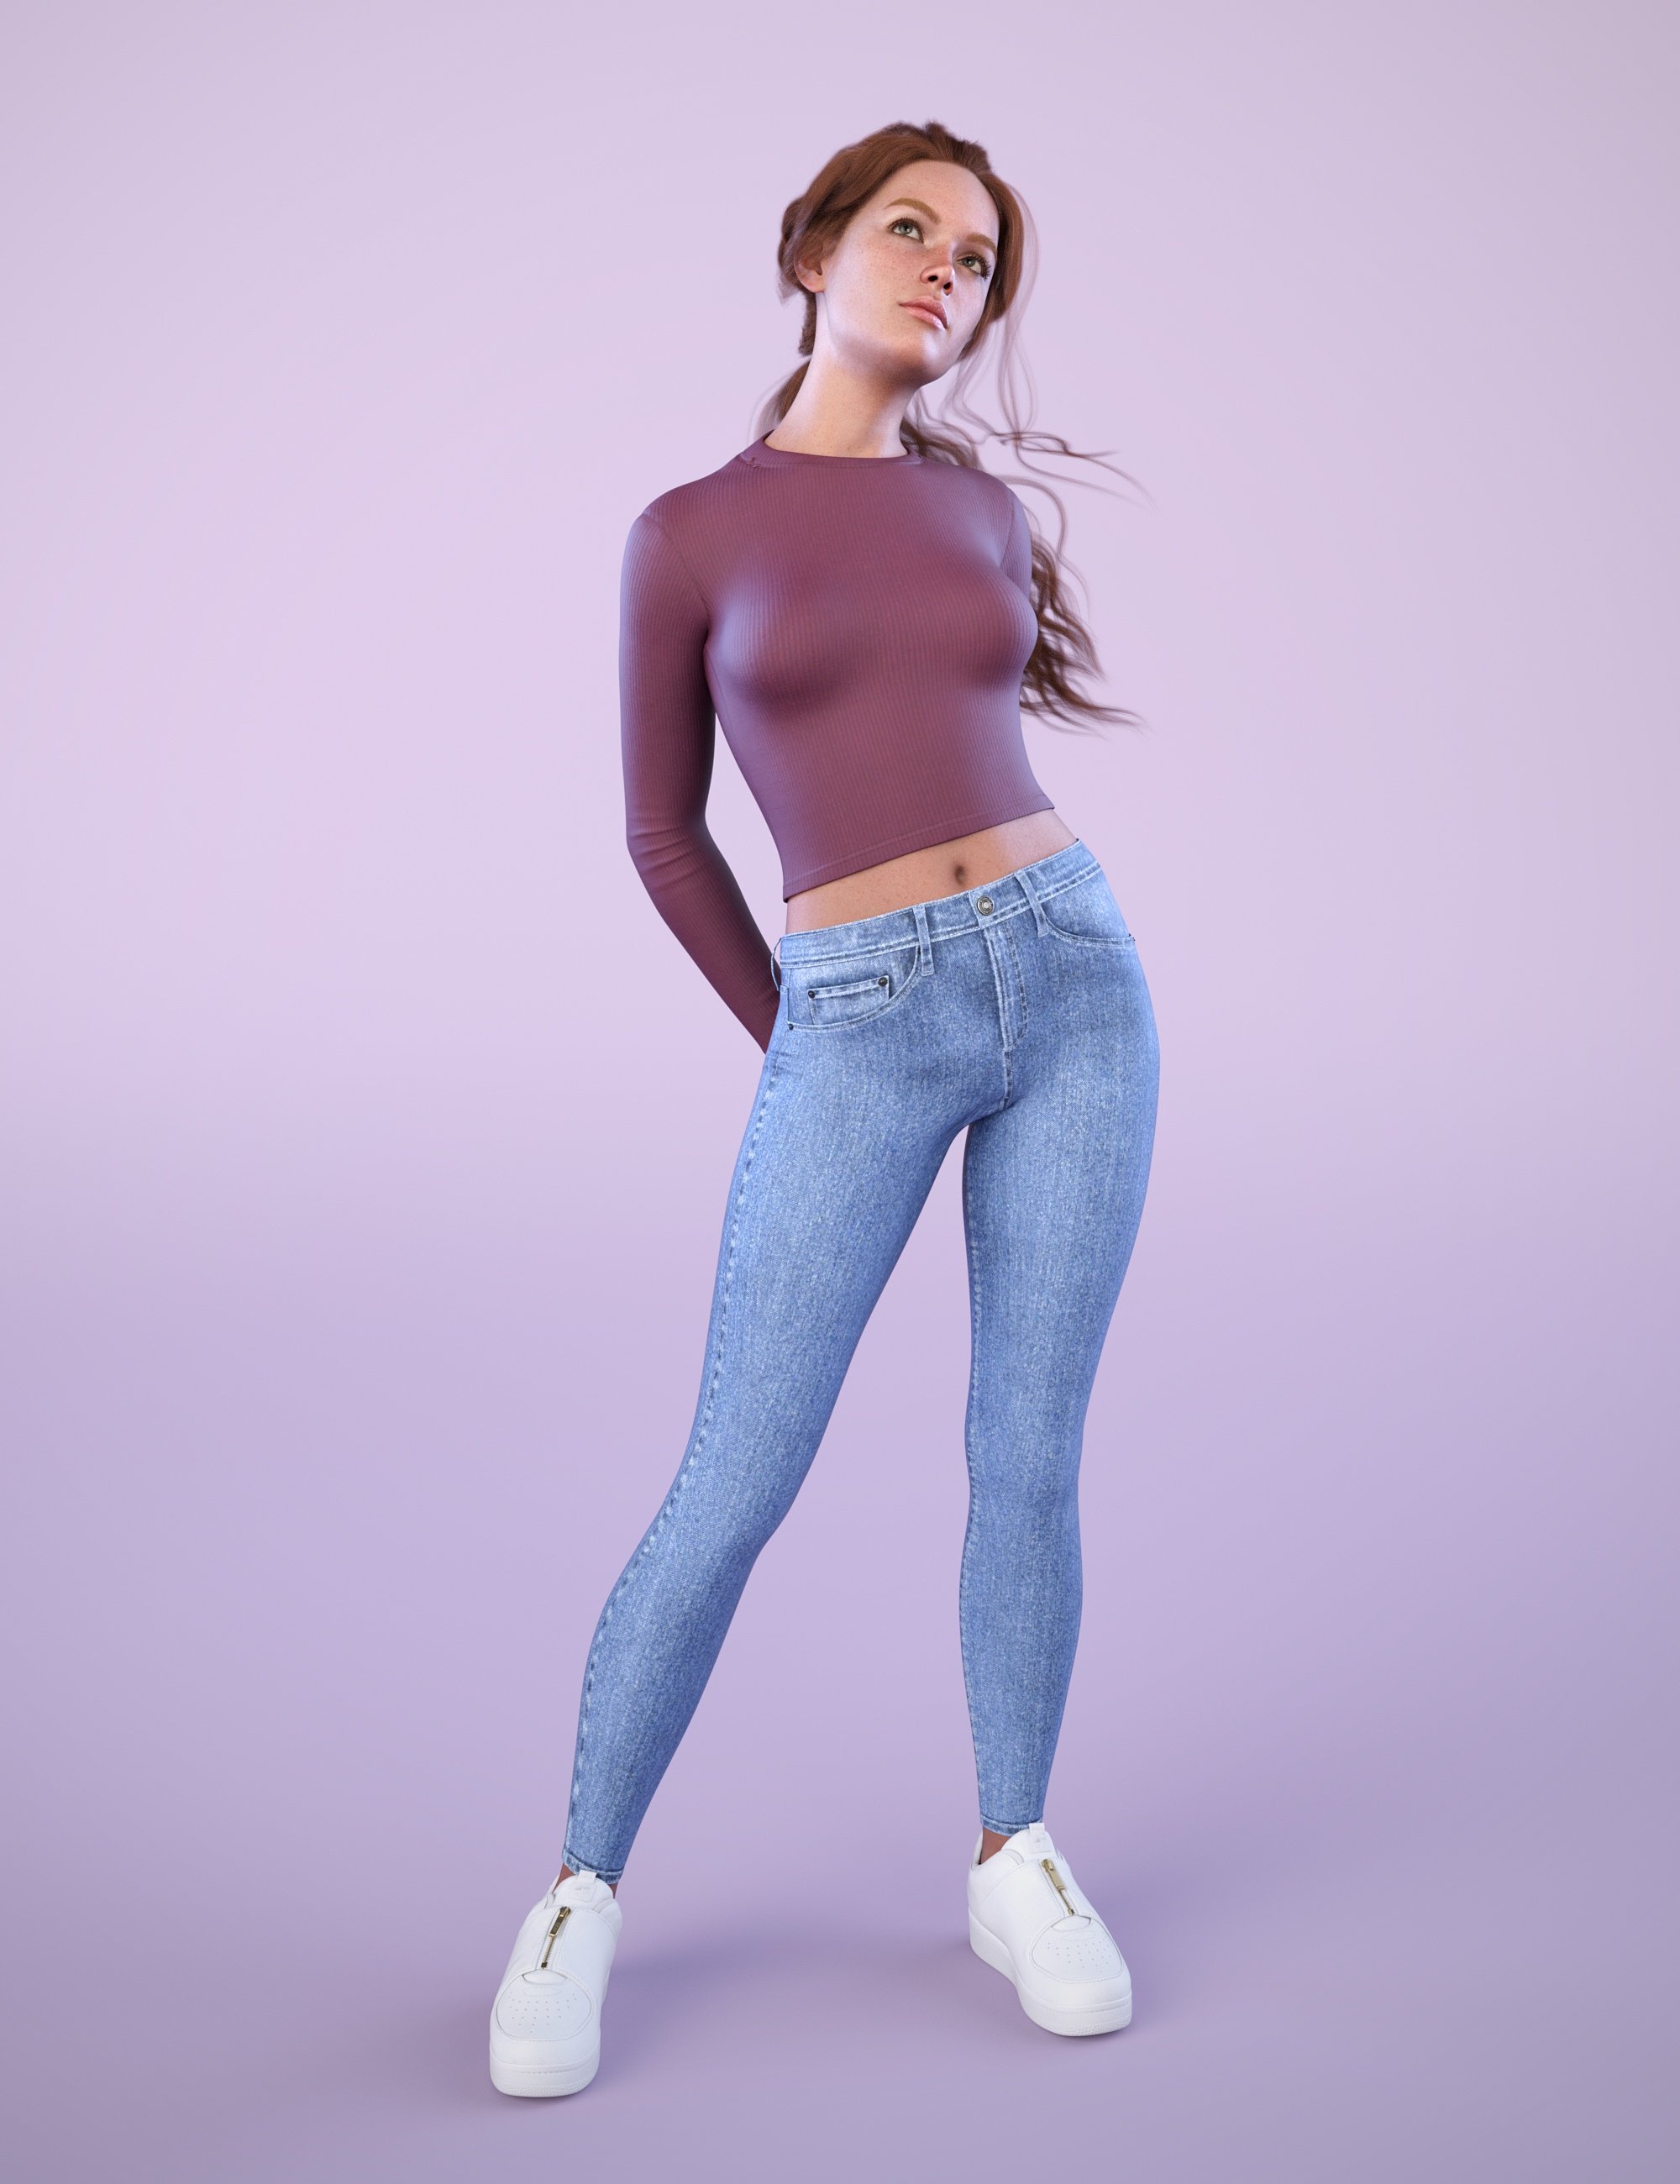 NG High Waist Skinny Jeans Outfit for Genesis 9 by: NewGuy, 3D Models by Daz 3D